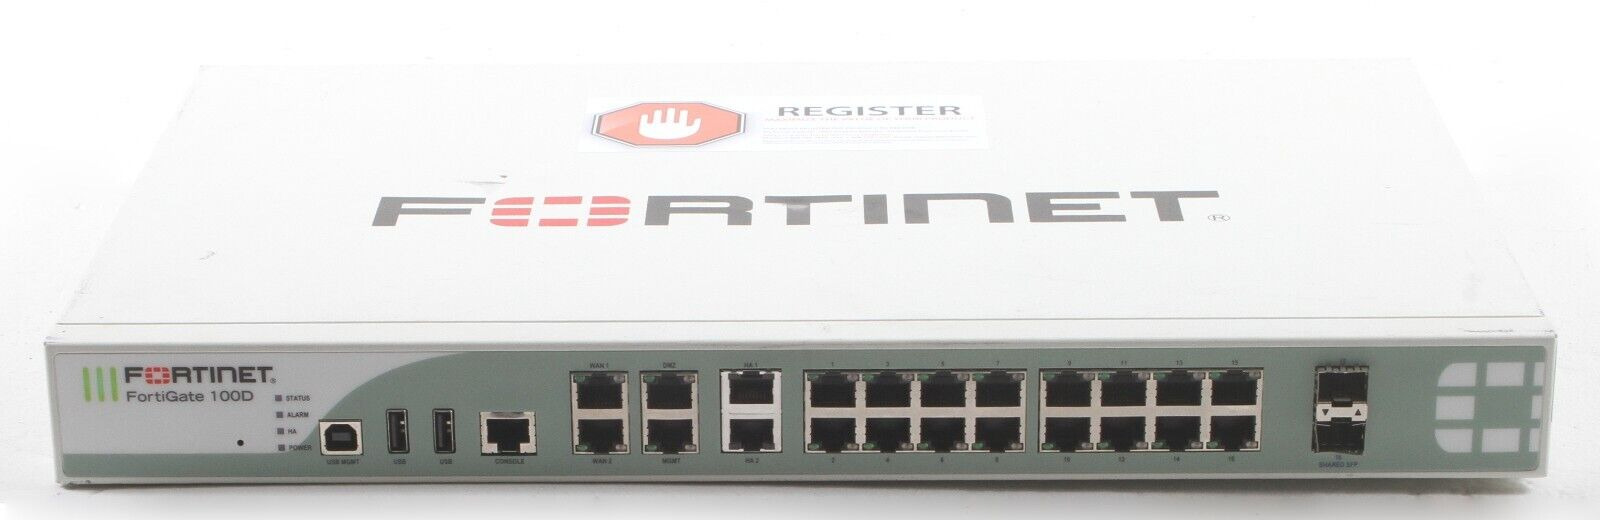 Fortinet FortiGate 100D Security Firewall Appliance; 6139556